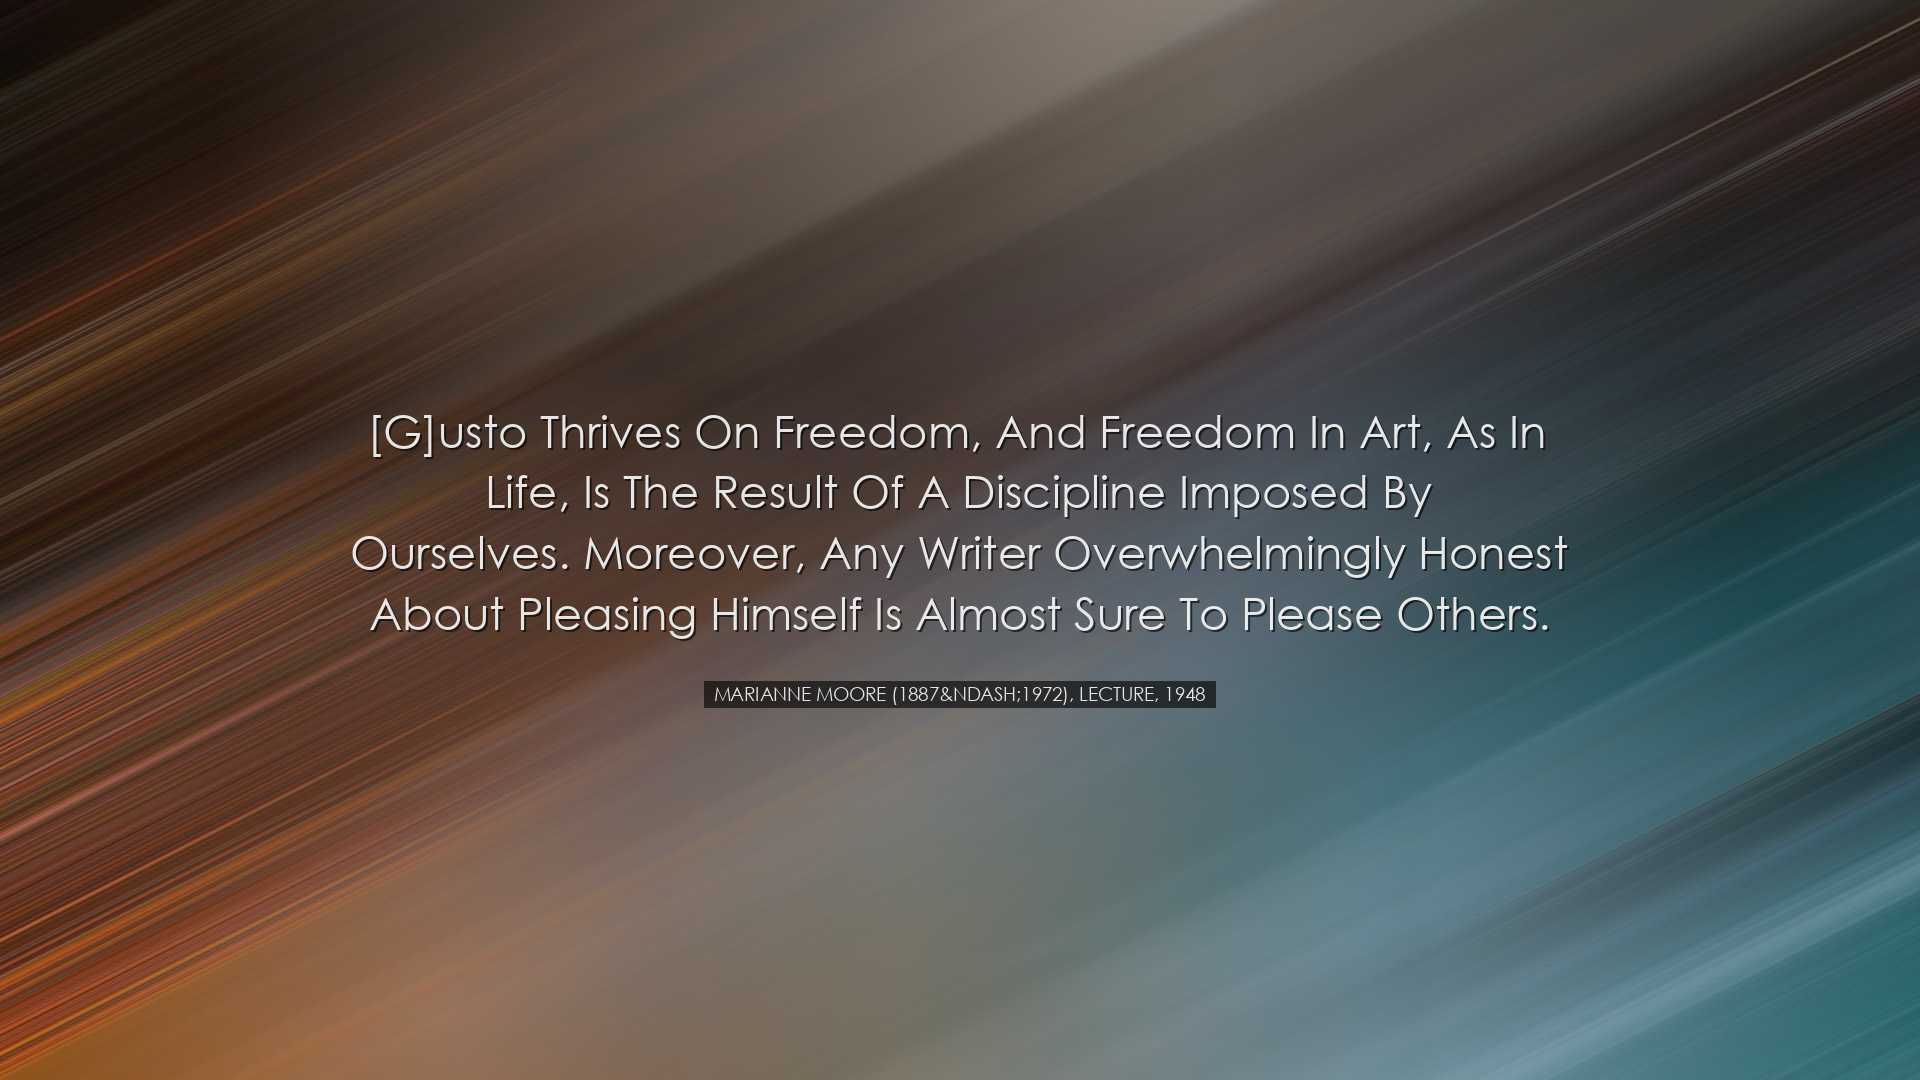 [G]usto thrives on freedom, and freedom in art, as in life, is the